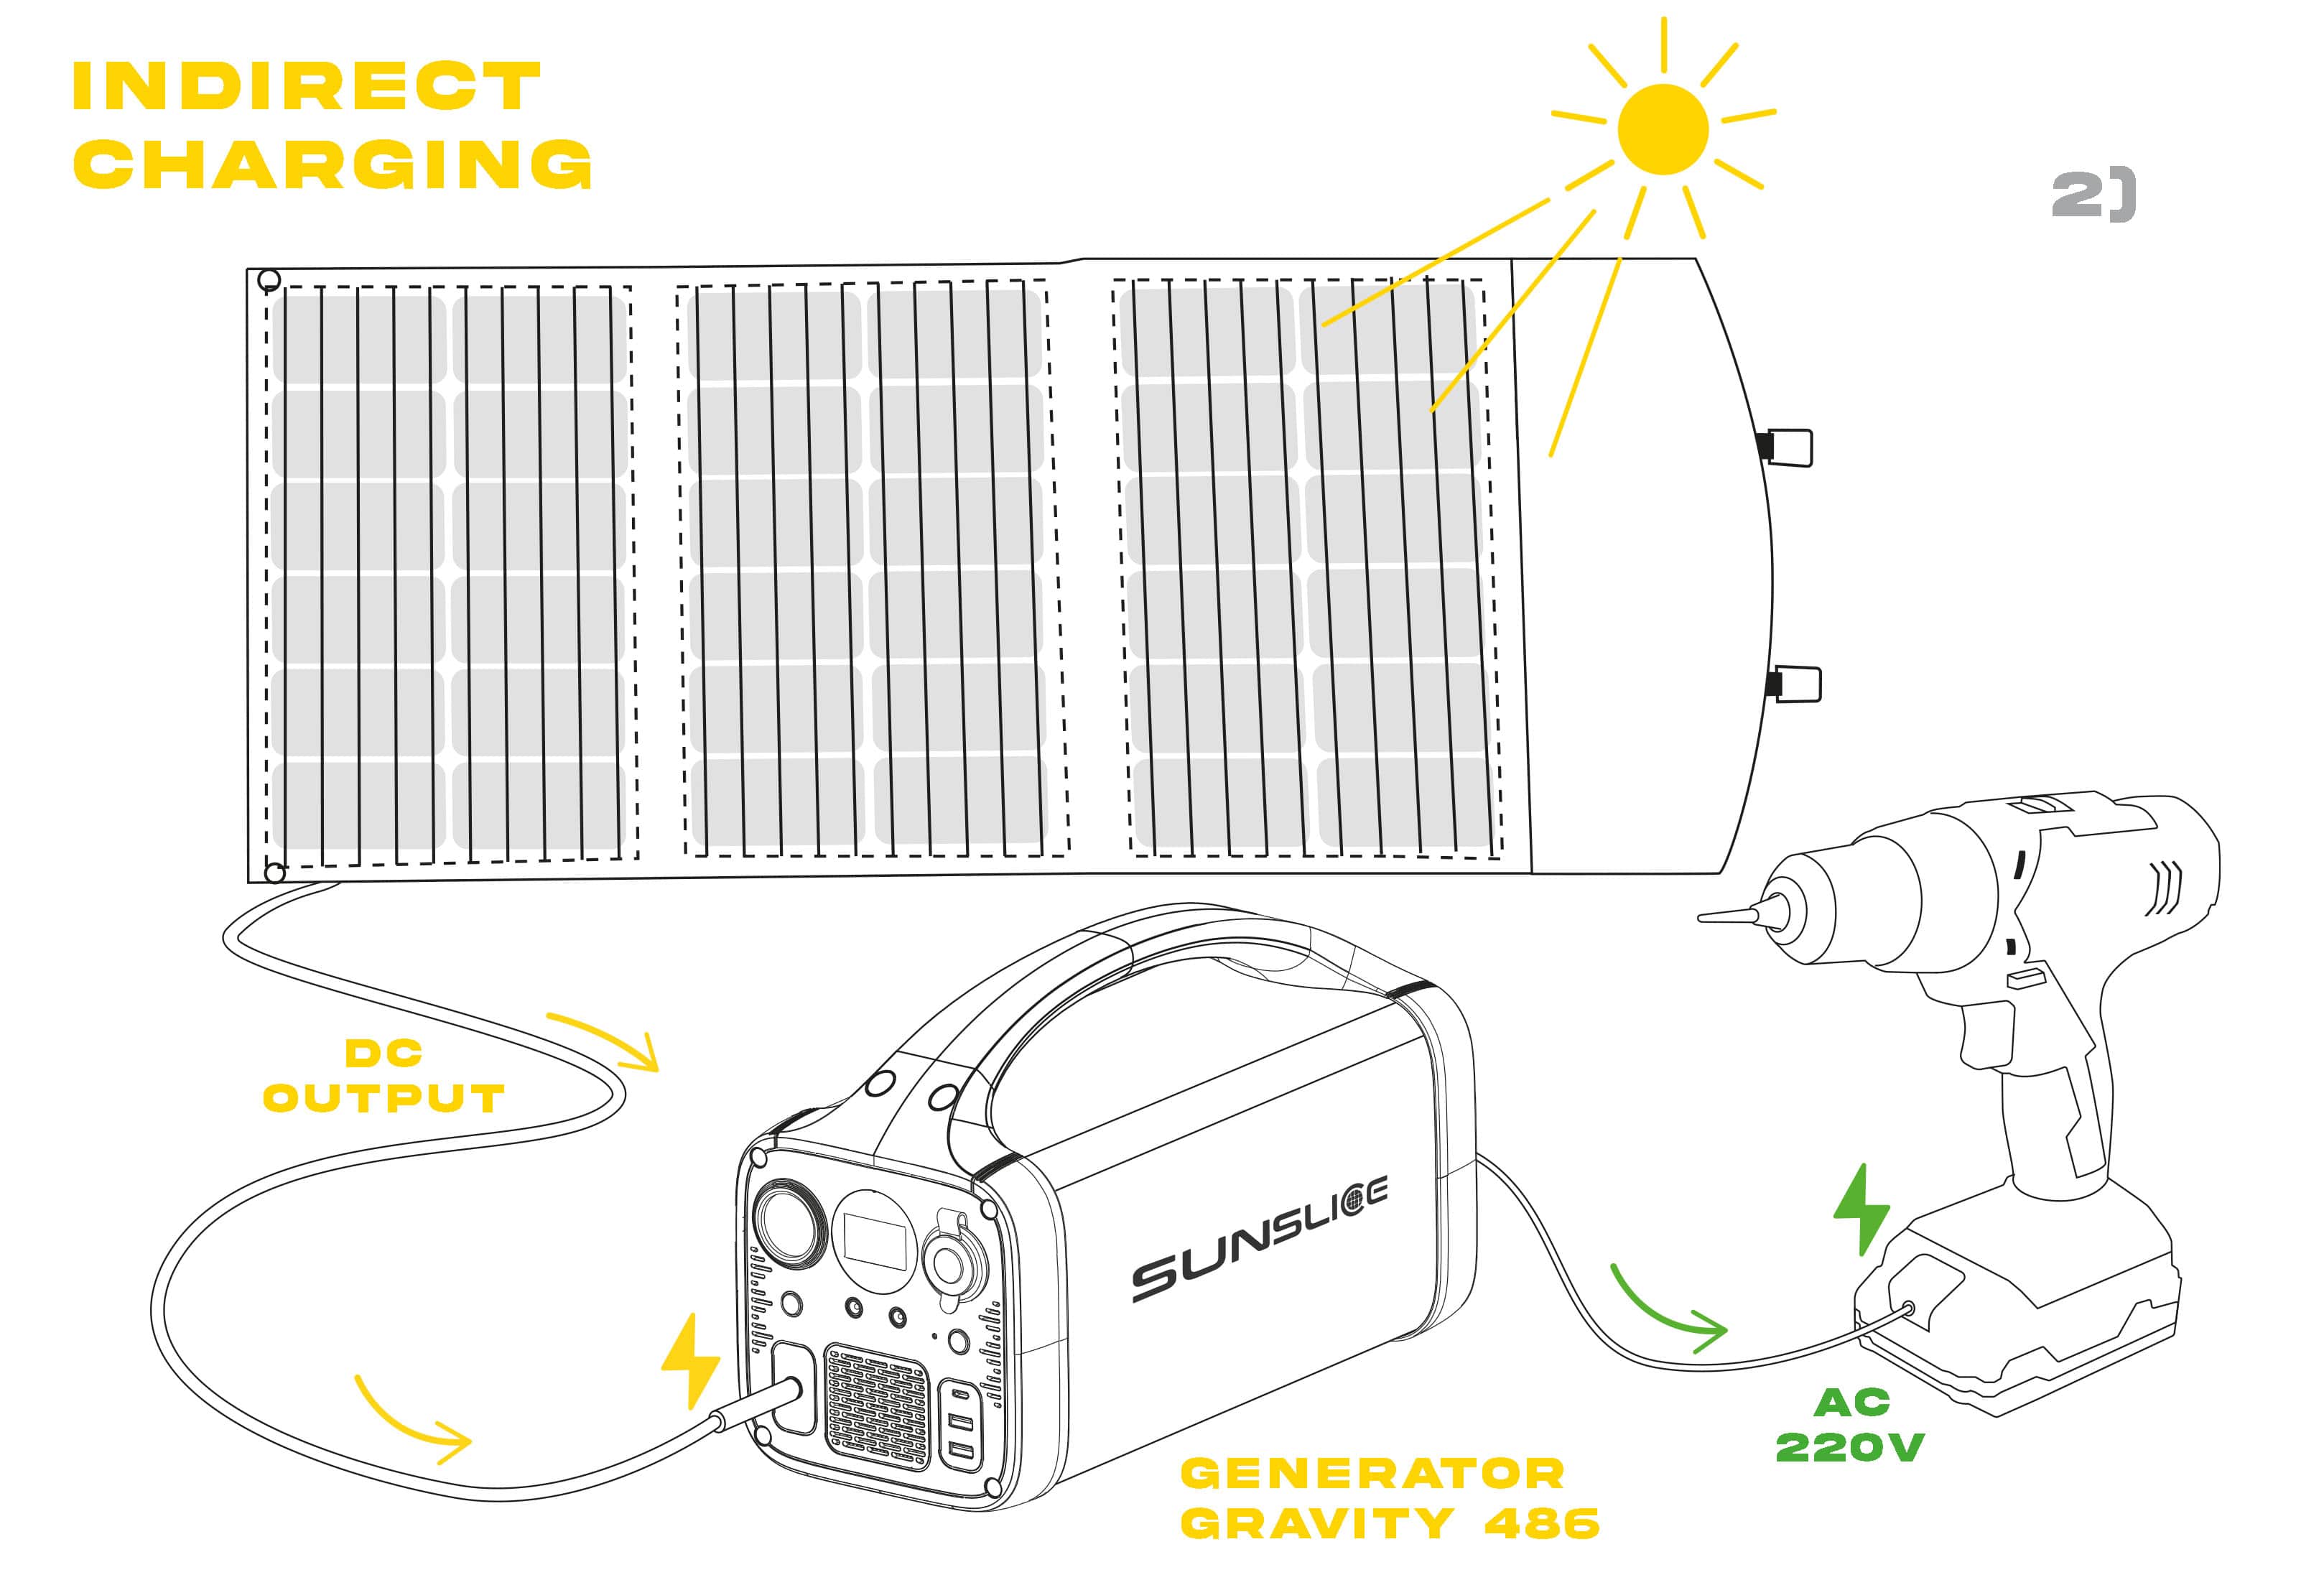 Big Solar panel ( fusion 100) under the sun charging a sunslice generator by a DC output and the generator chaging a electric screwdriver 